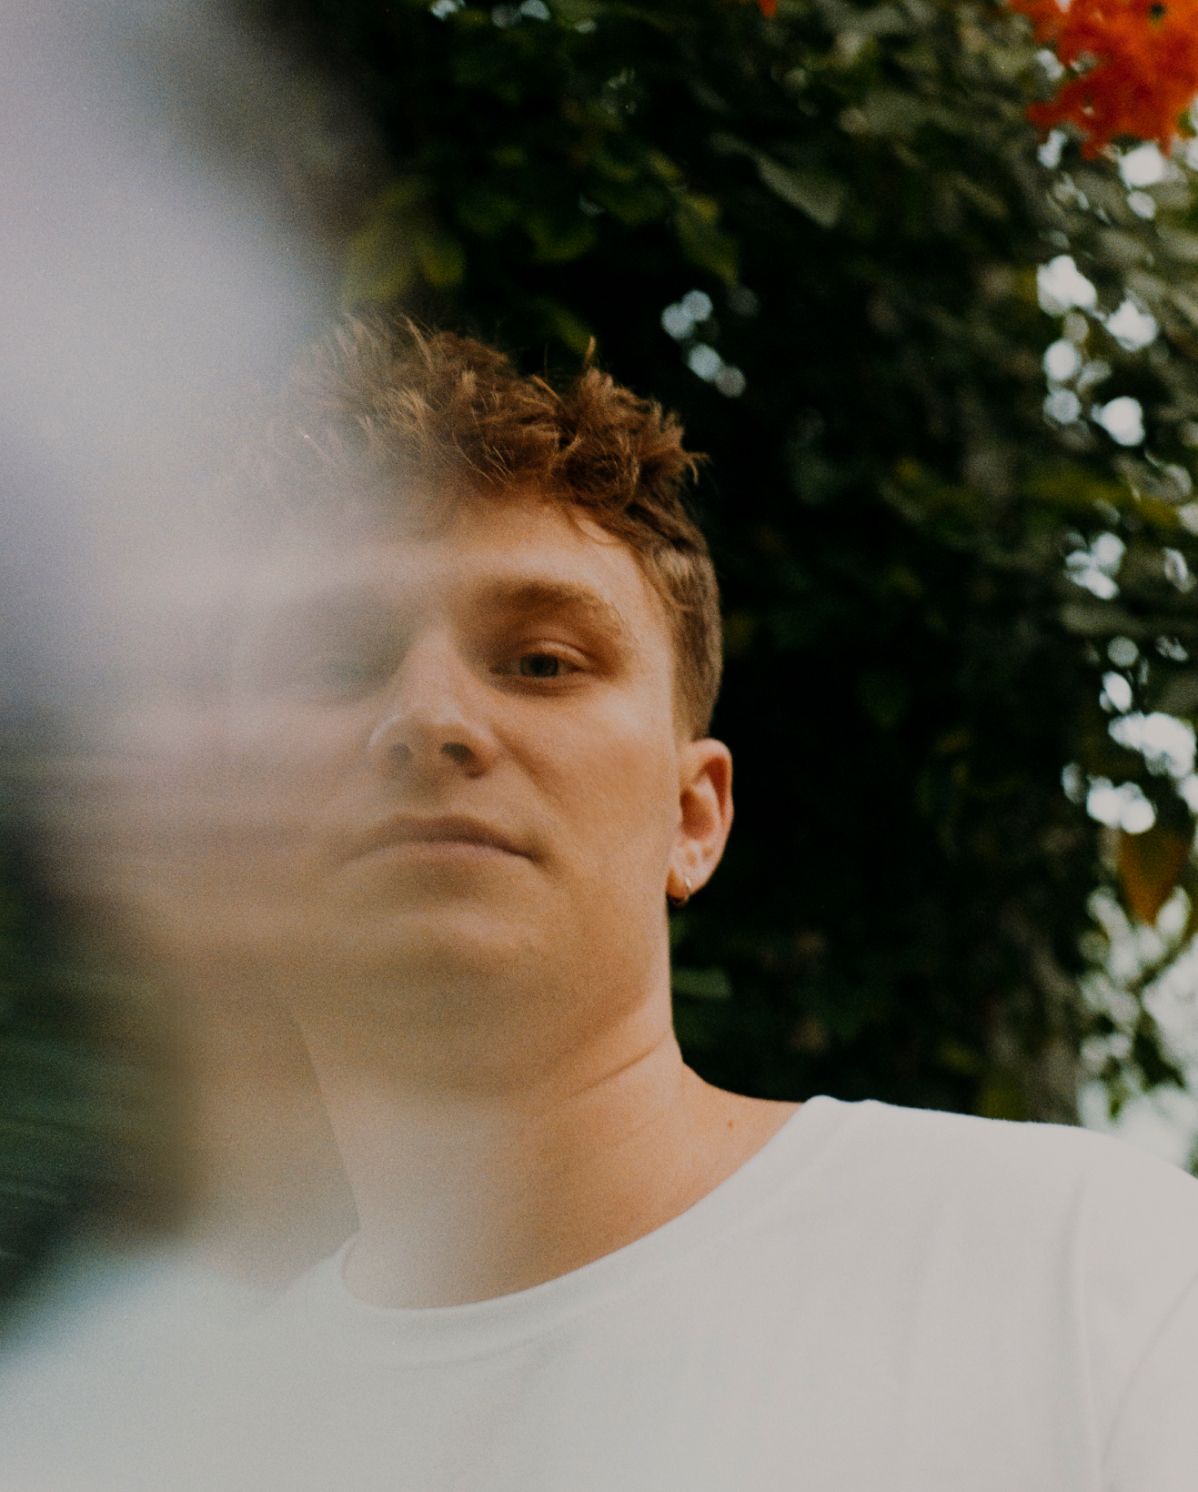 A person with short, curly hair is gazing slightly downward. They are wearing a white shirt, with a blurred section partially obscuring their face. The background features green foliage and a hint of colorful flowers. The overall tone is soft and slightly mysterious.